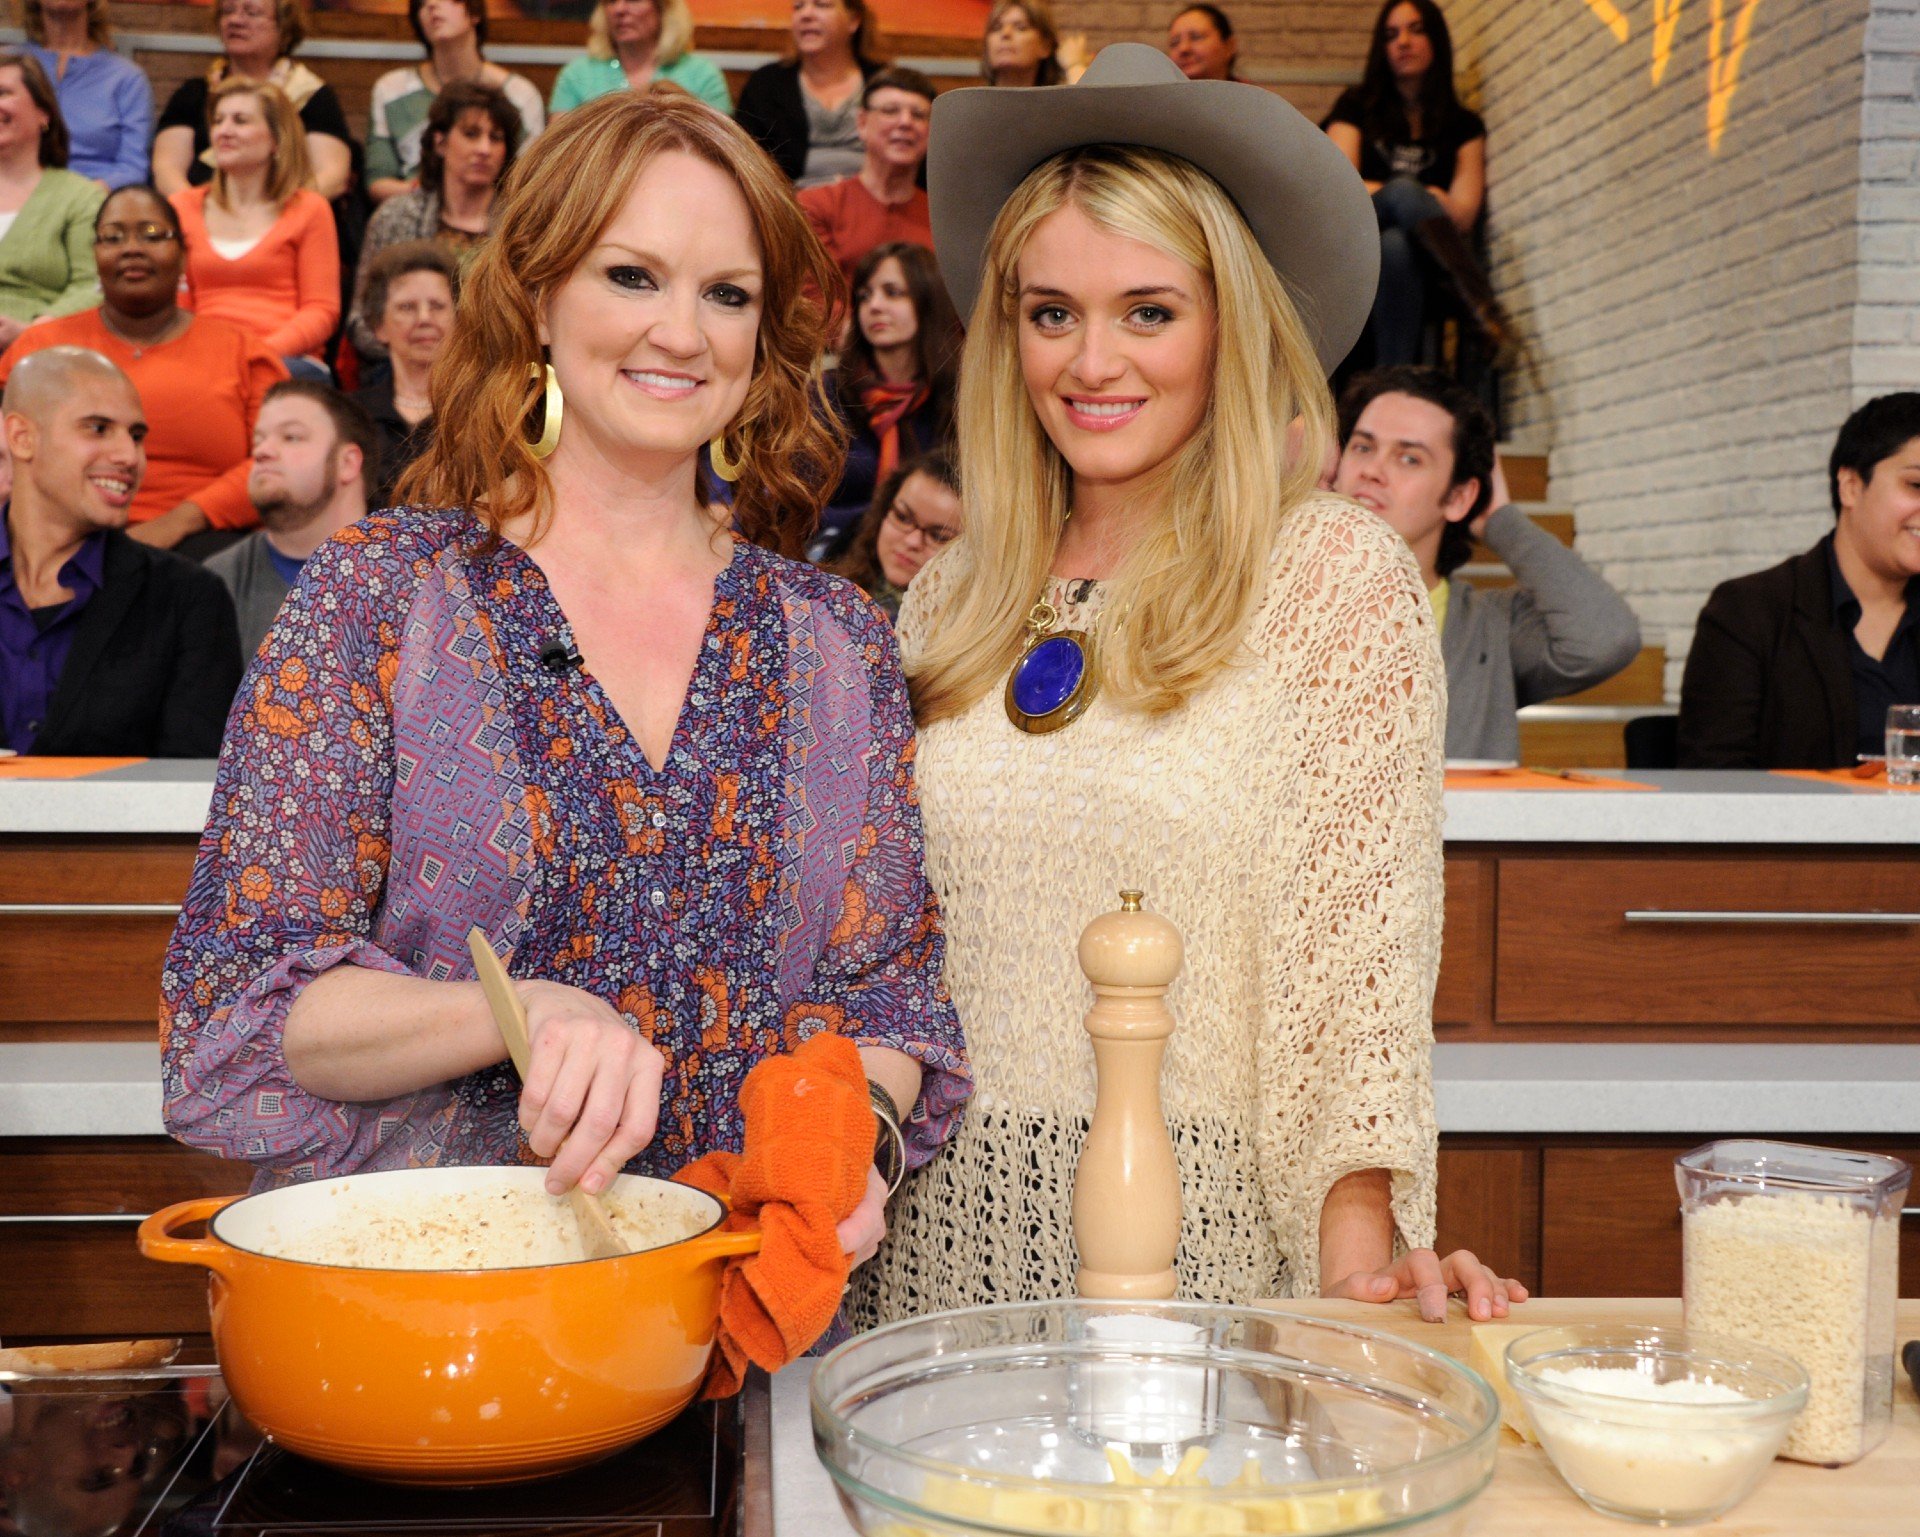 Ree Drummond stirs a pot of food while posing next to Daphne Oz on The Chew.